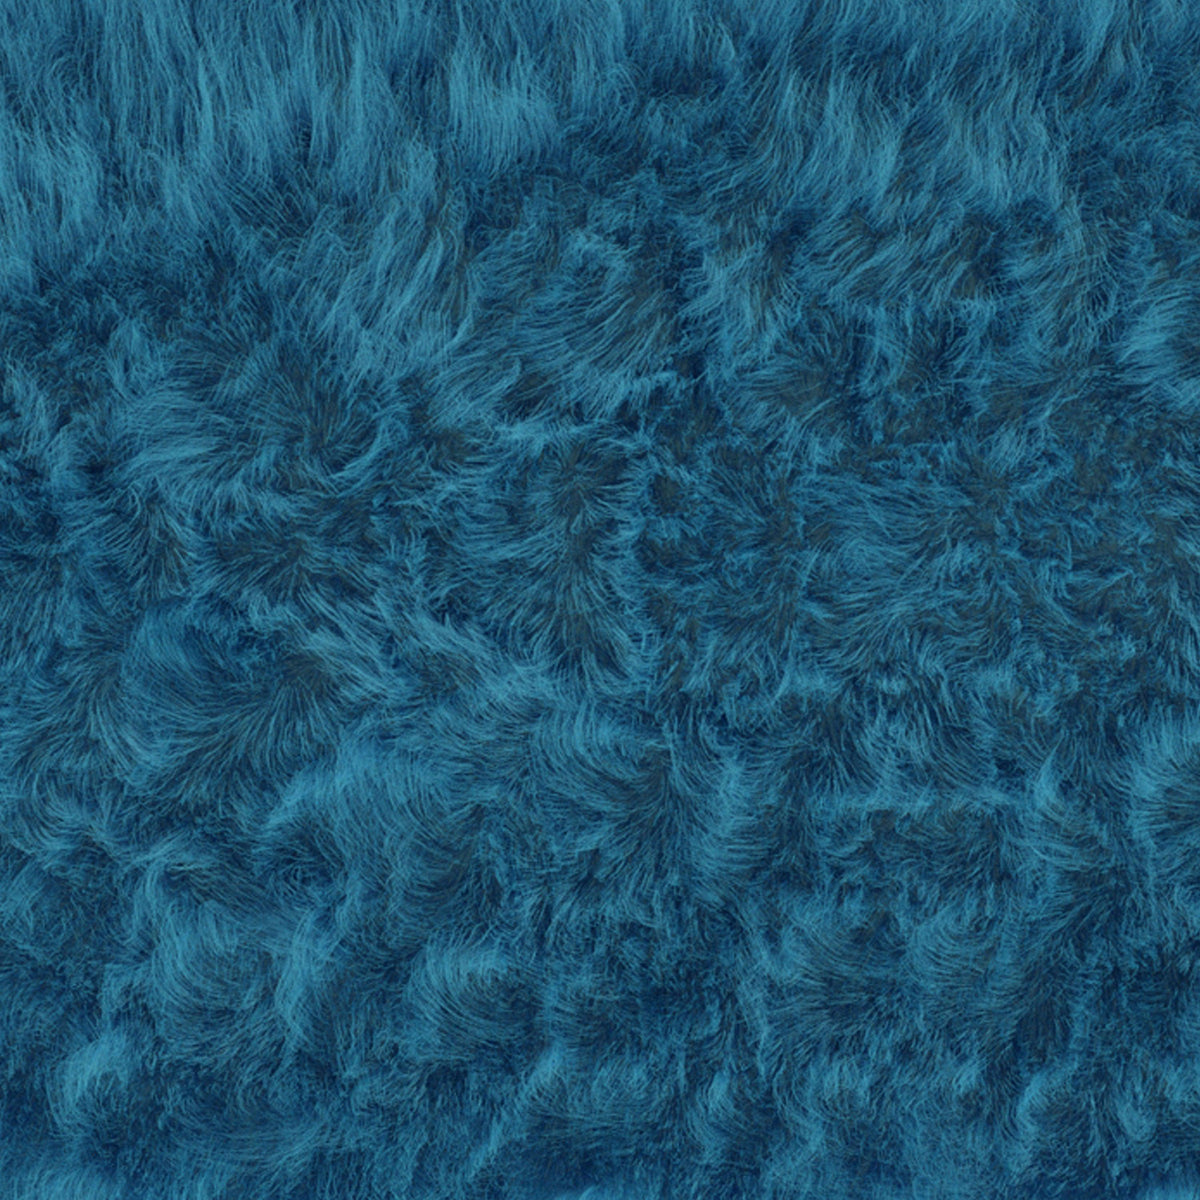 Turquoise,2' x 7' |#| Extra Soft & Fluffy Turquoise Faux Fur Round Indoor 2' x 7' Plush Area Rug